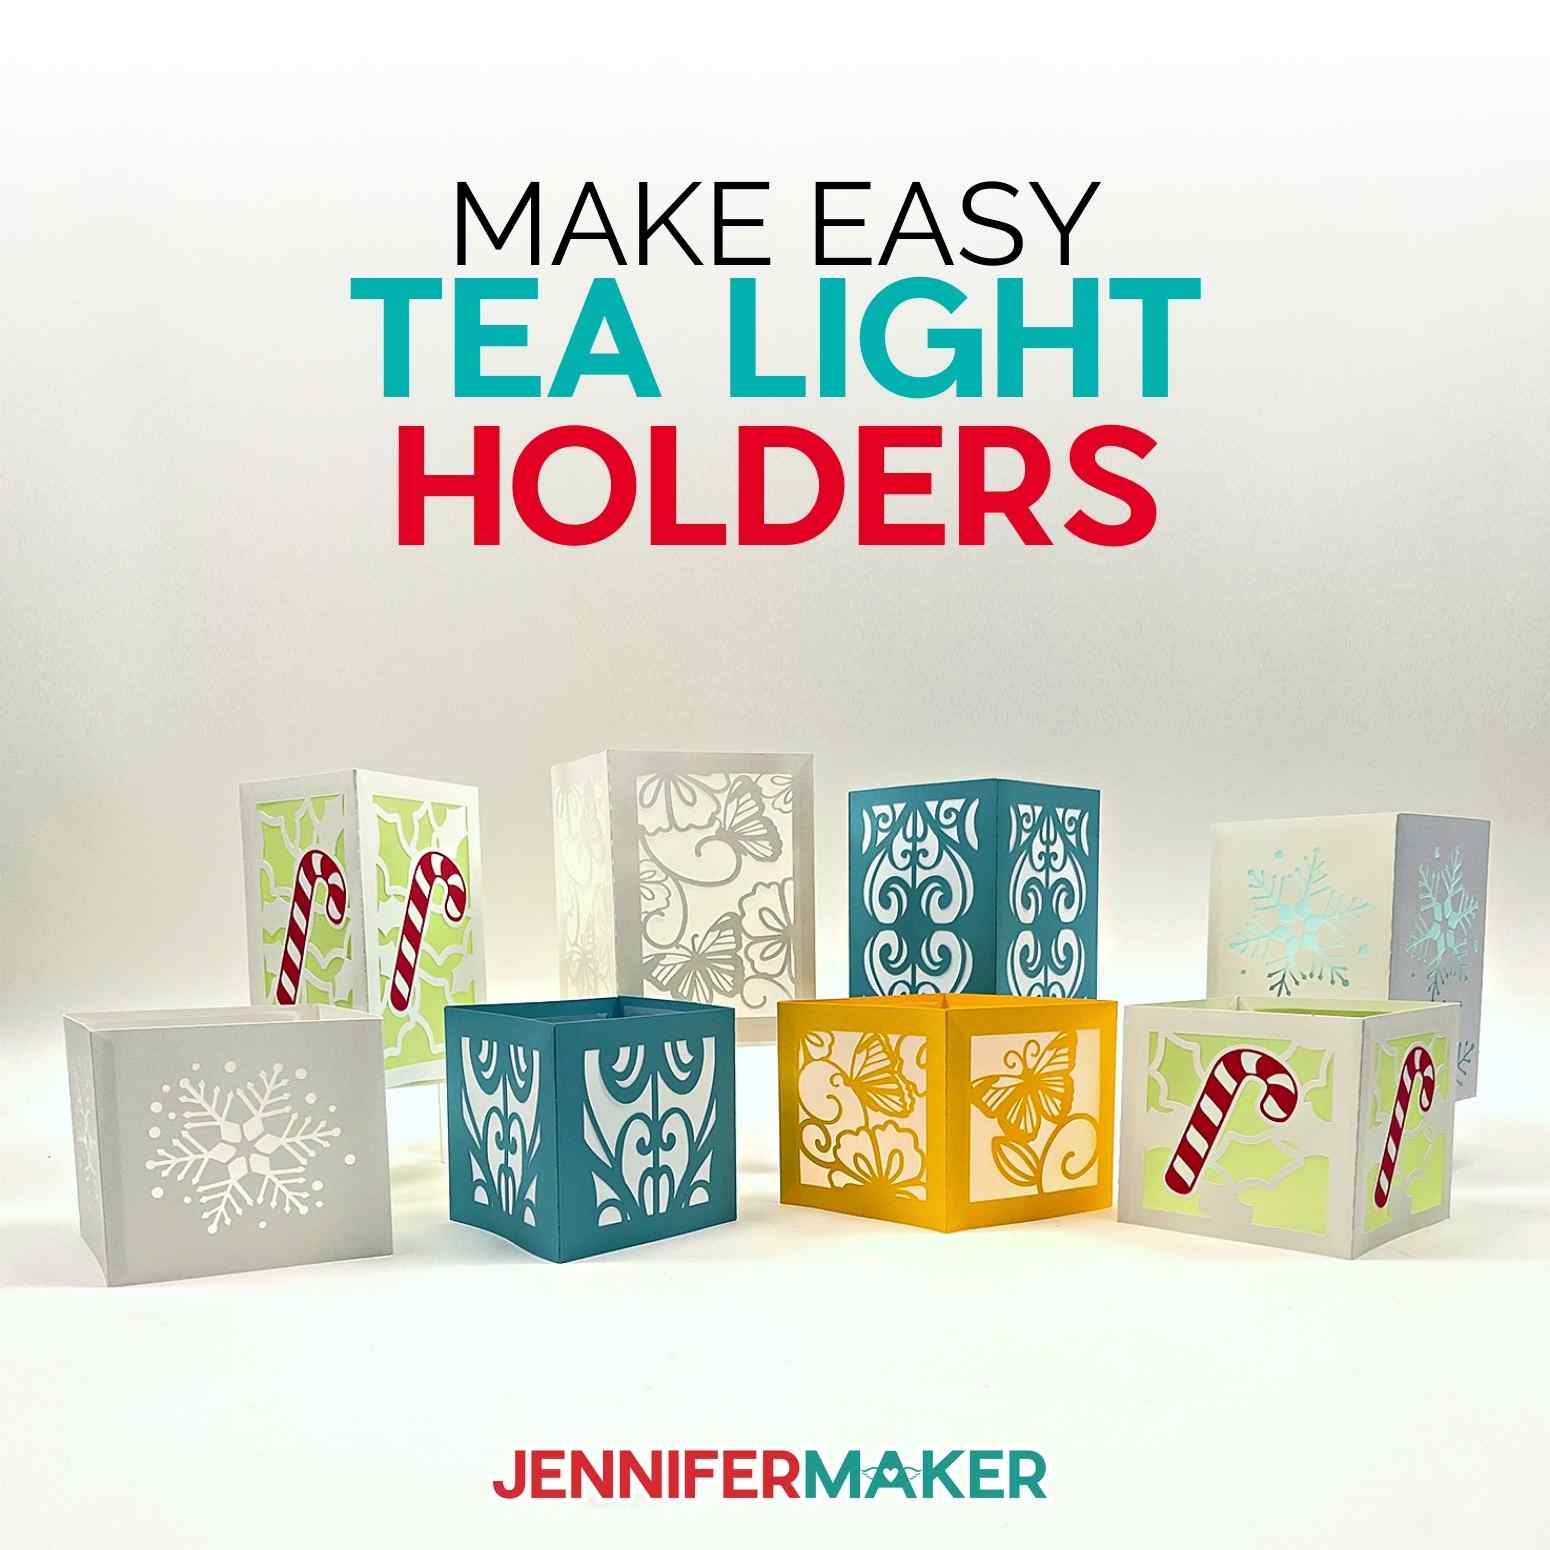 How to make easy tea light holders from cardstock to light up a home or party!